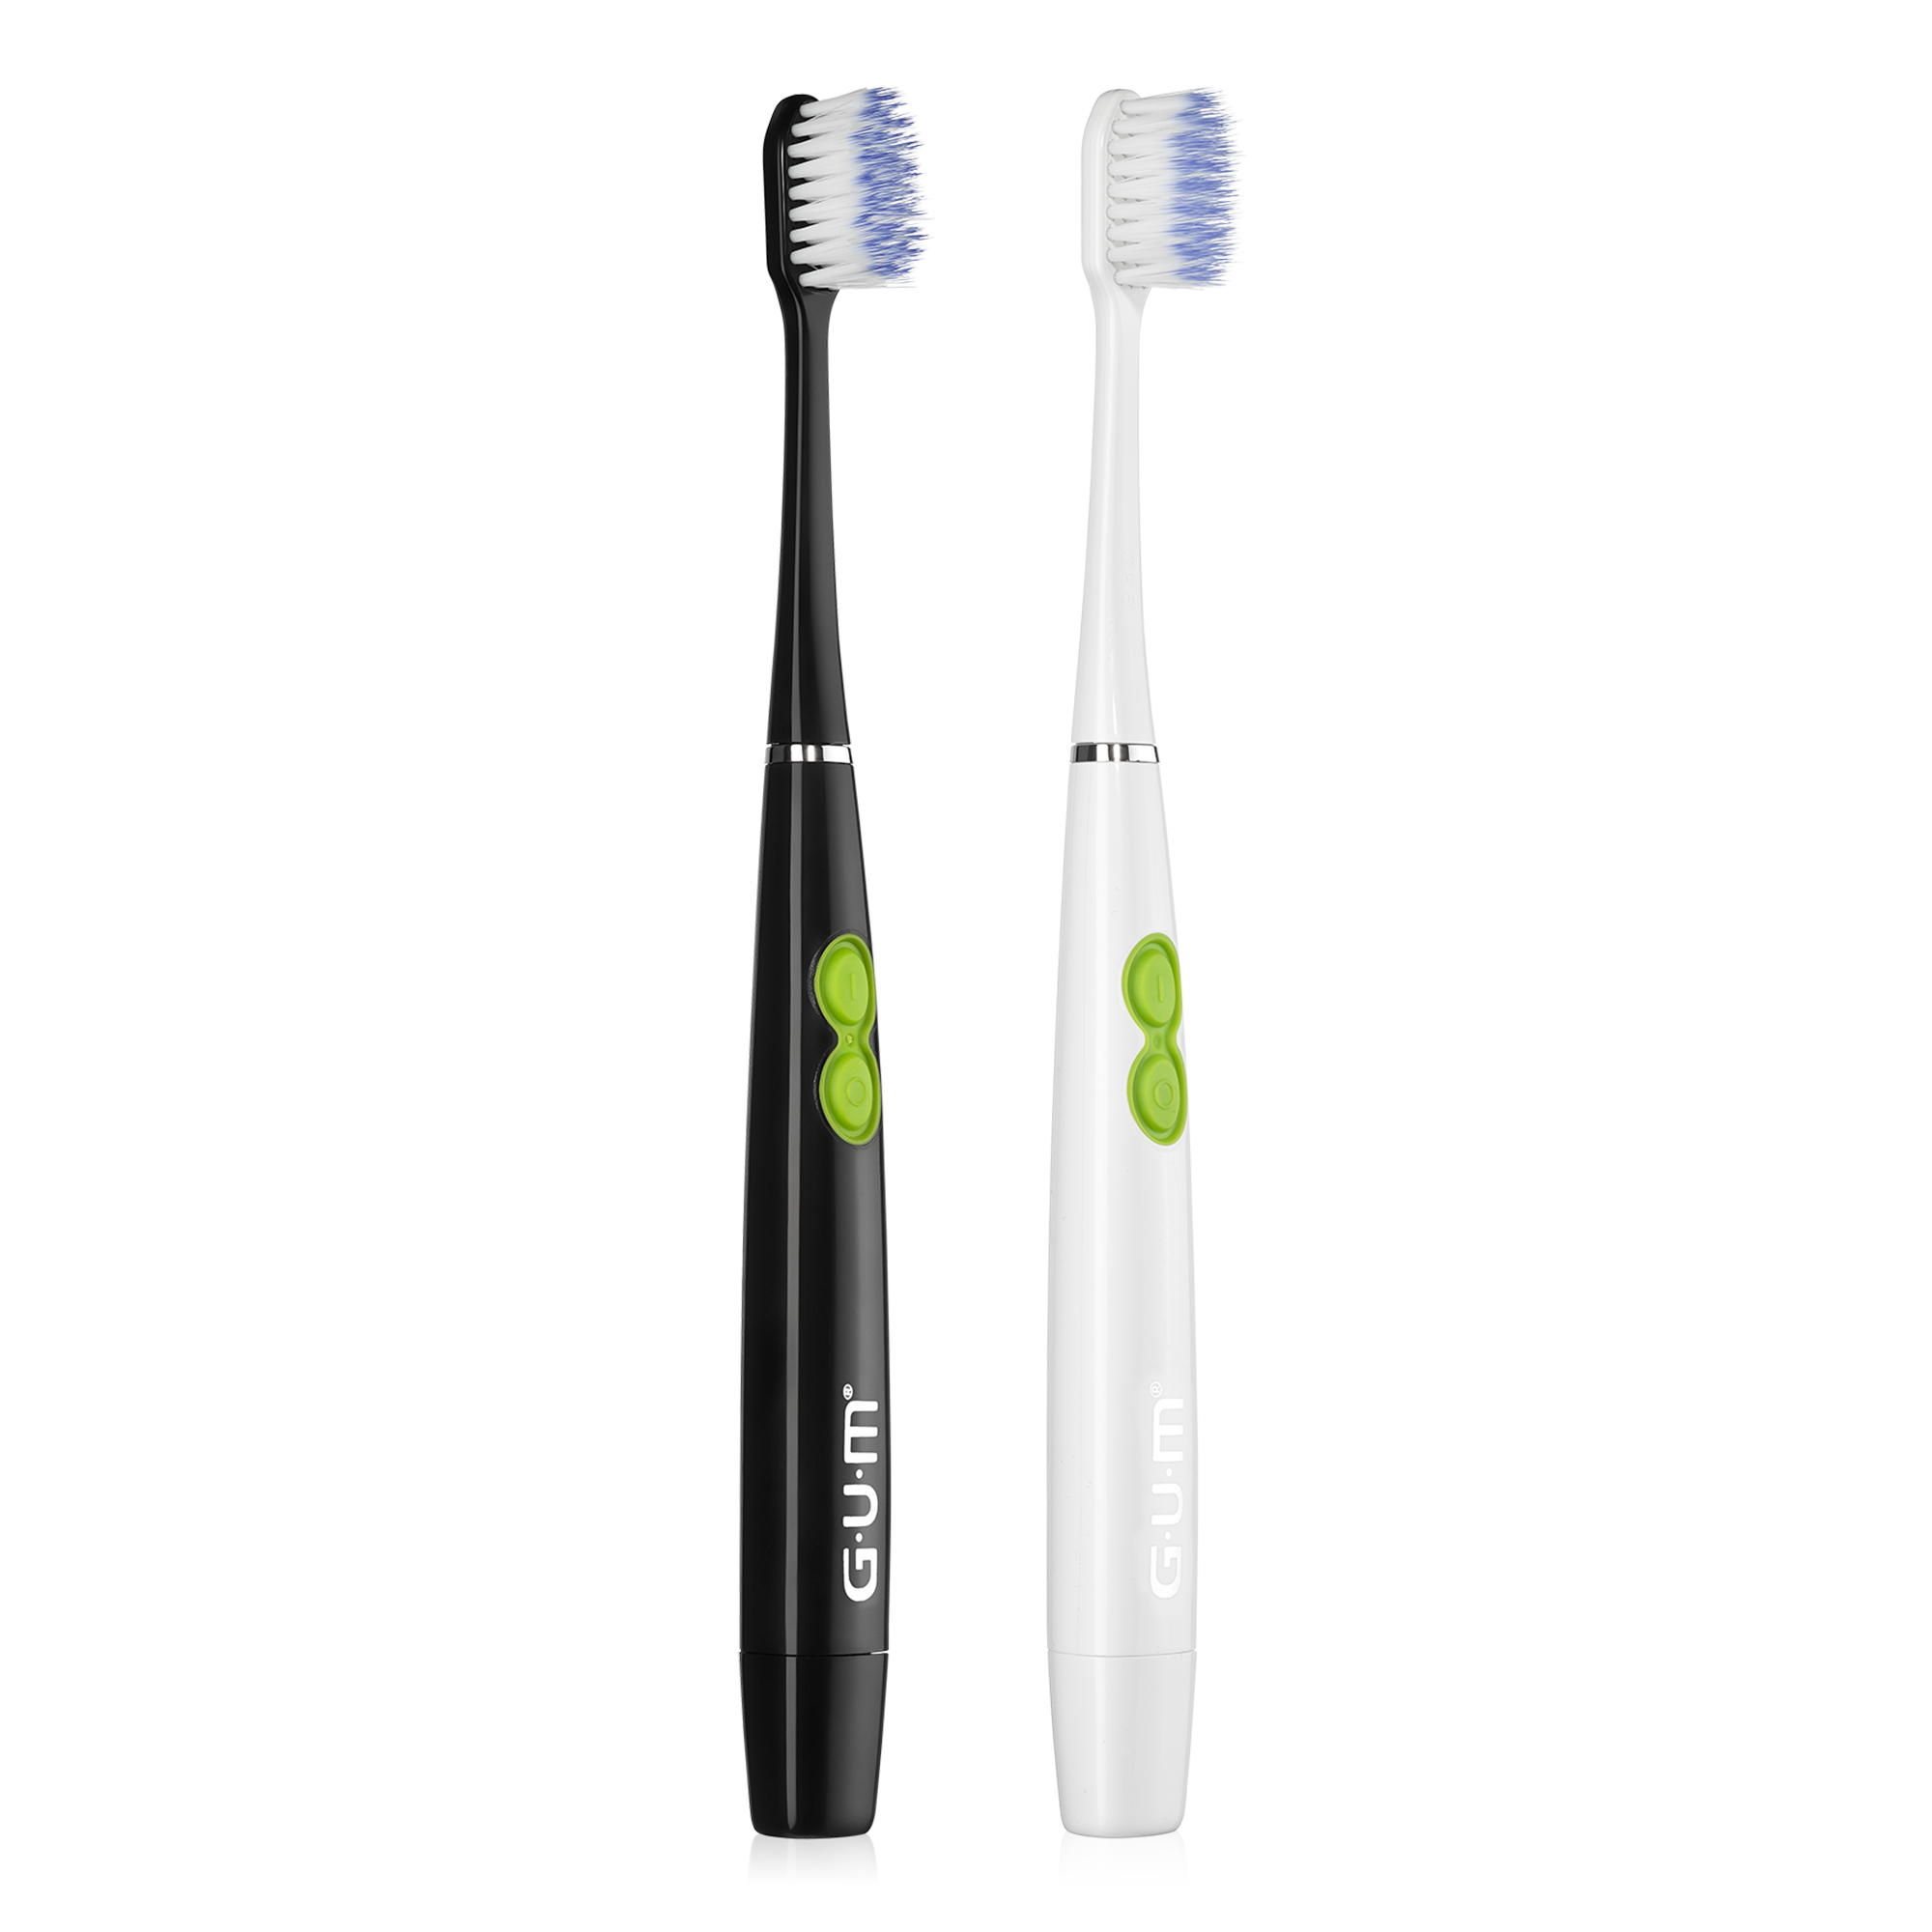 GUM SONIC DAILY Battery Powered Electric Toothbrush | Highly Portable